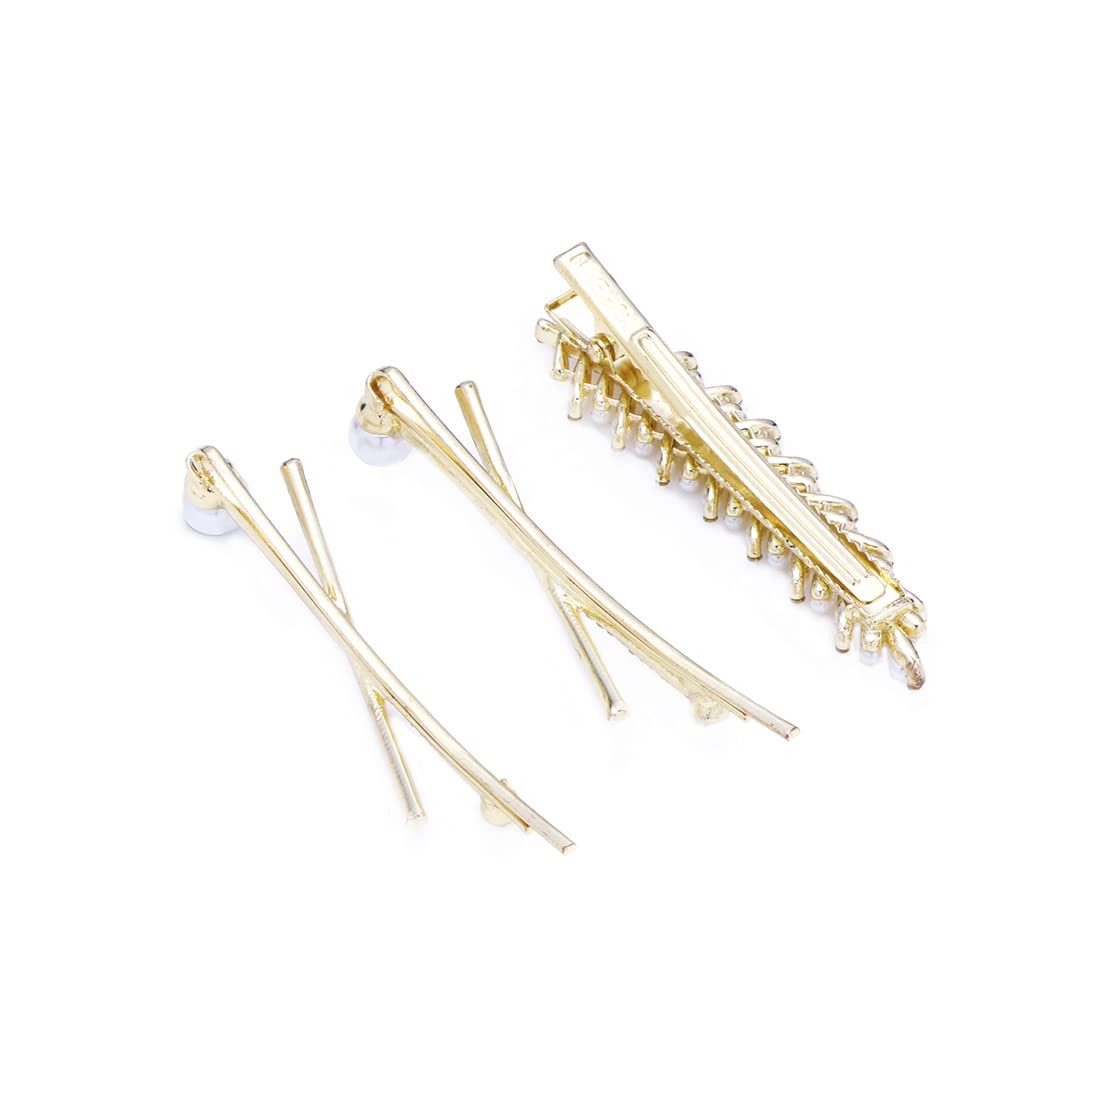 Yellow Chimes 3pcs Elegant Hairpin Allegator Pin White Pearl Bobby Pins Crystal Jewelry Bridal Wedding Decorative Hair Pins Clips Hair Accessories Ornaments for Women Girls